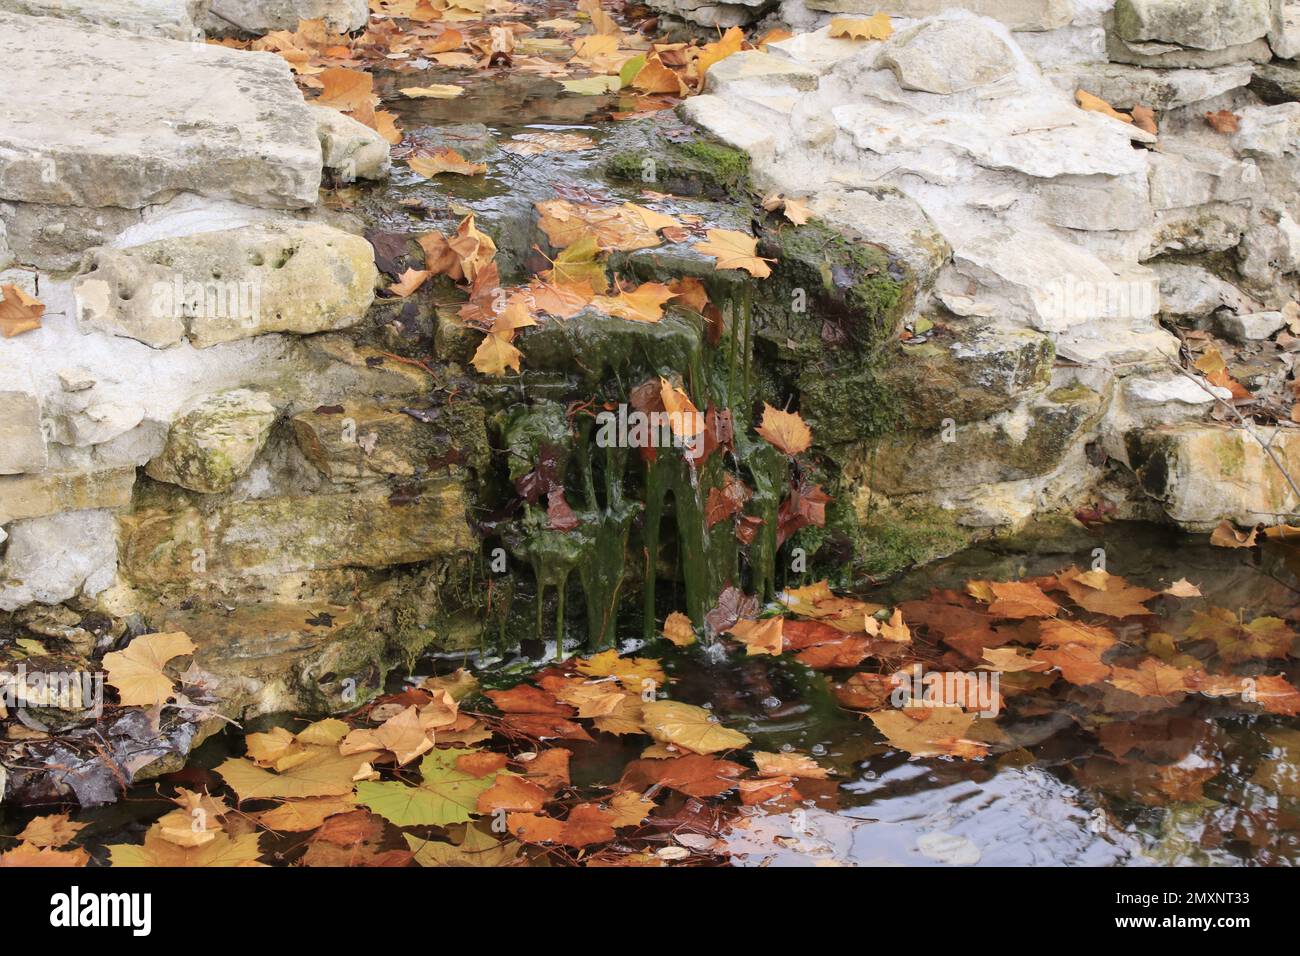 Waterfall with colorful fall leaves in the water Stock Photo